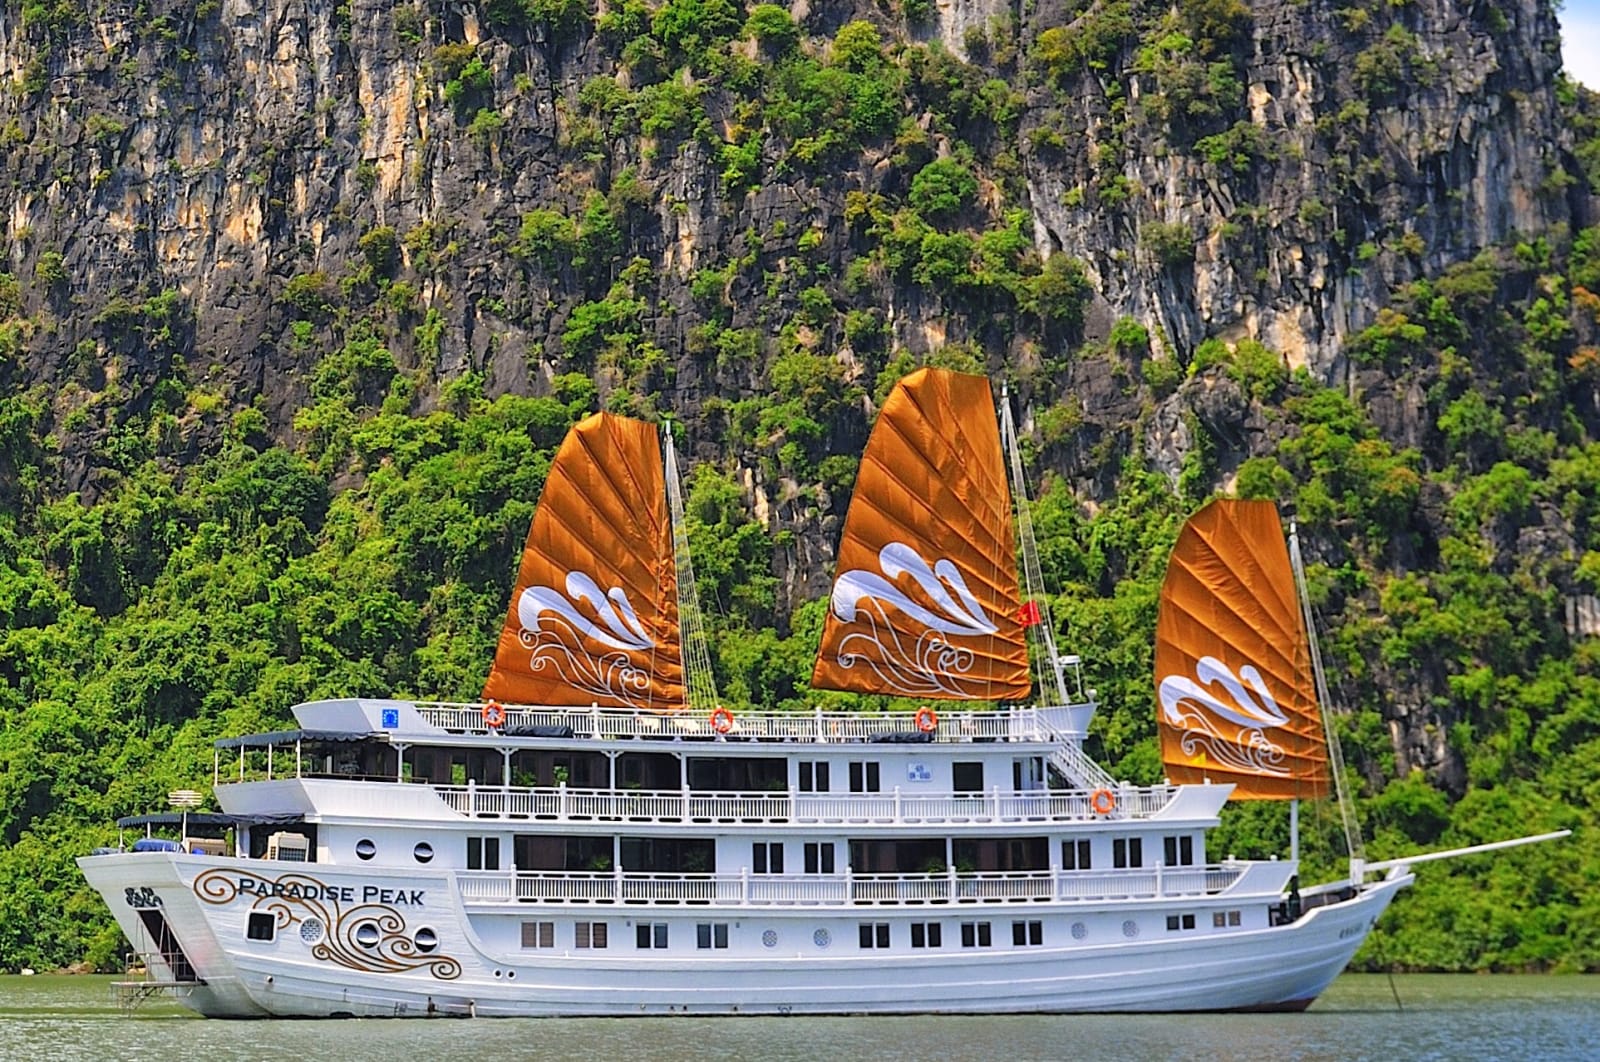 Halong Bay Cruise has many prices